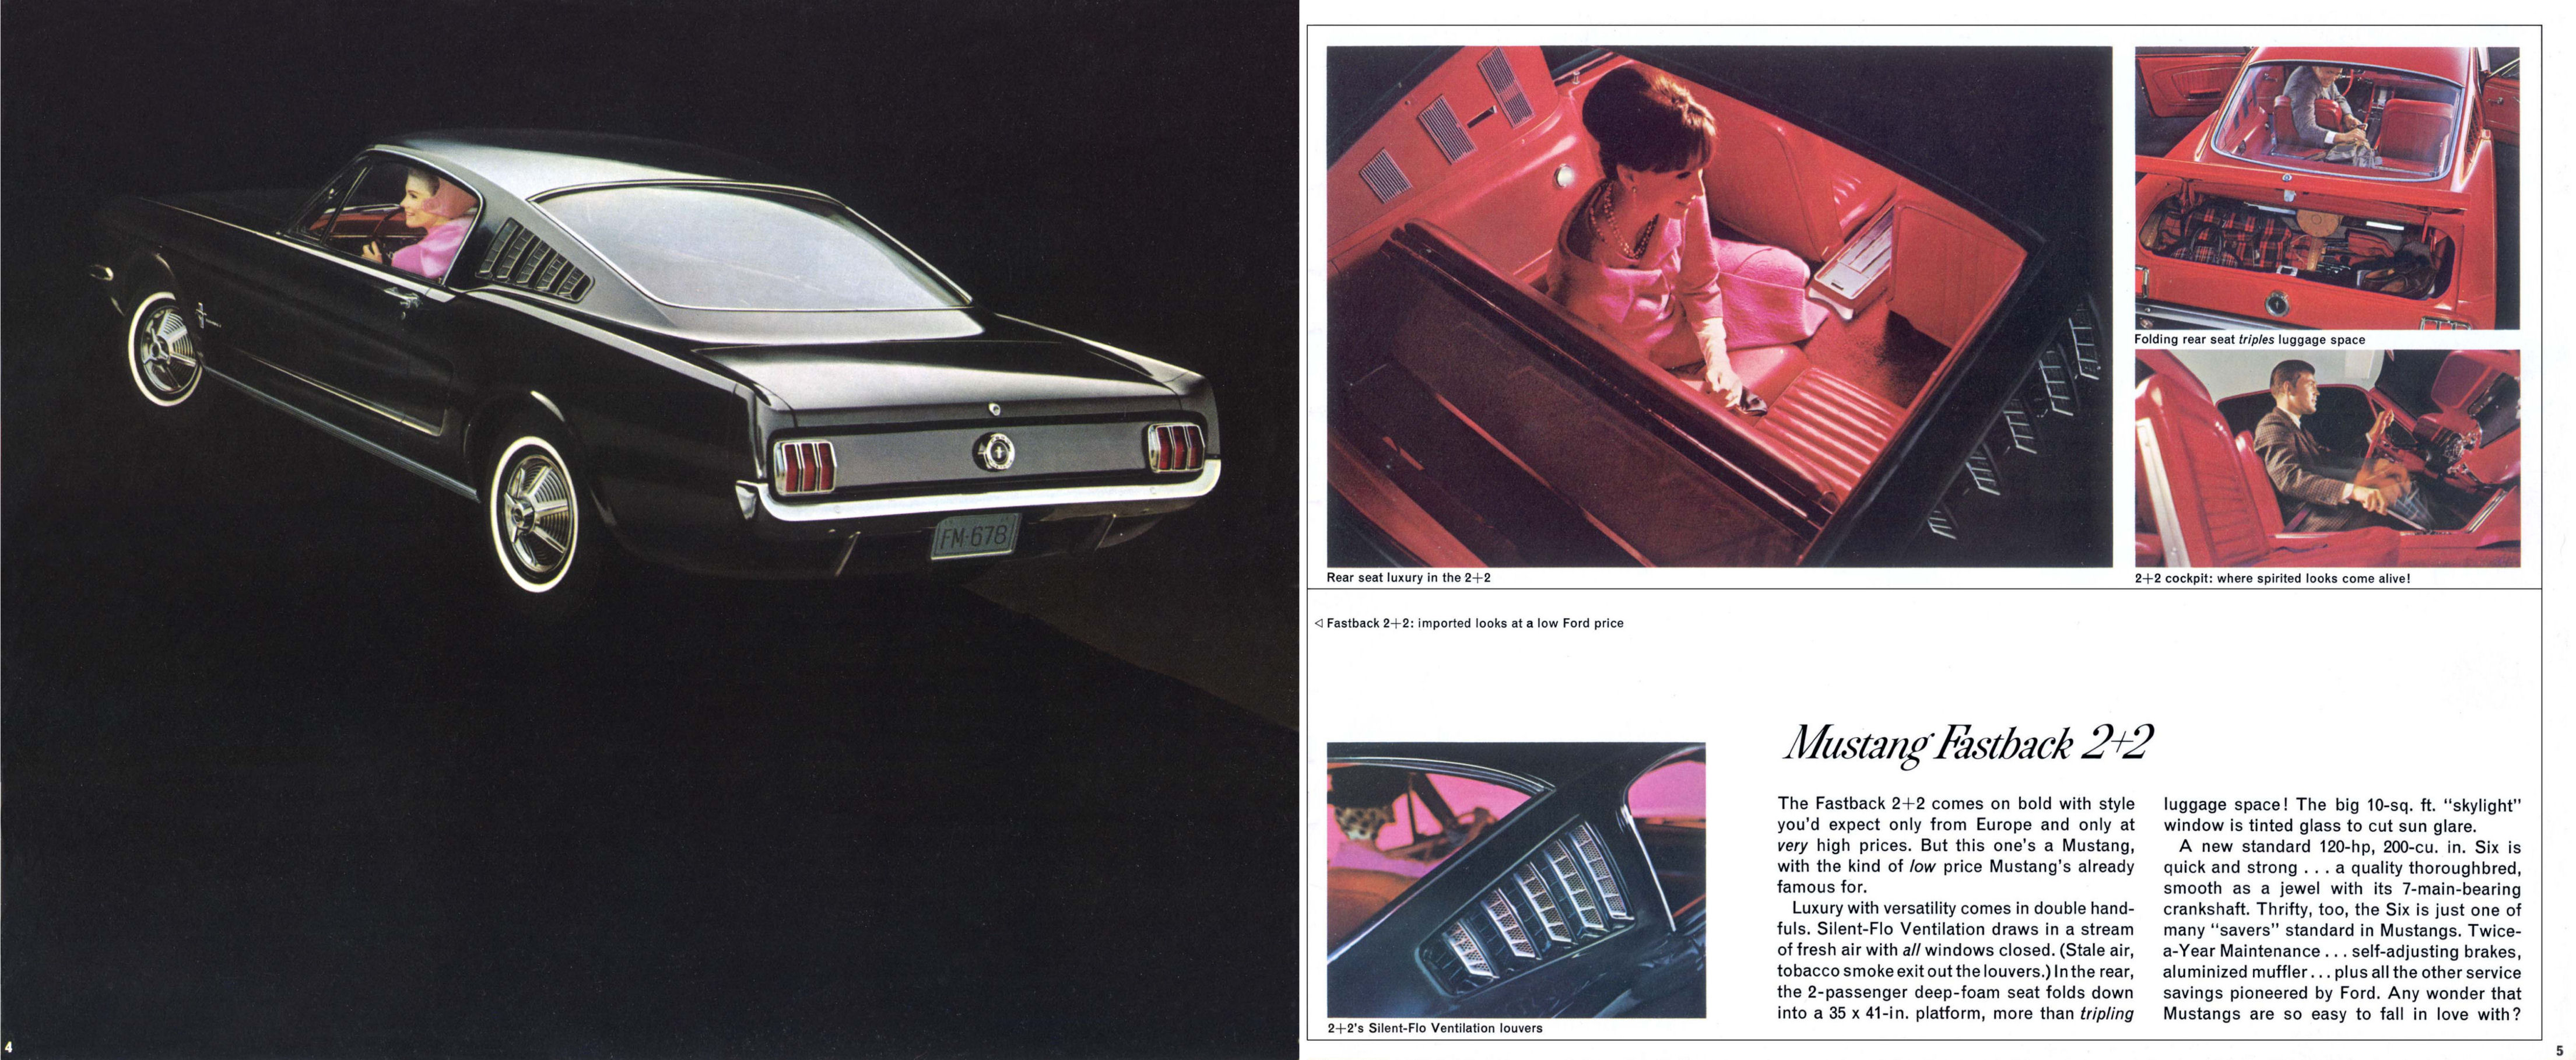 1965_Ford_Mustang-04-05